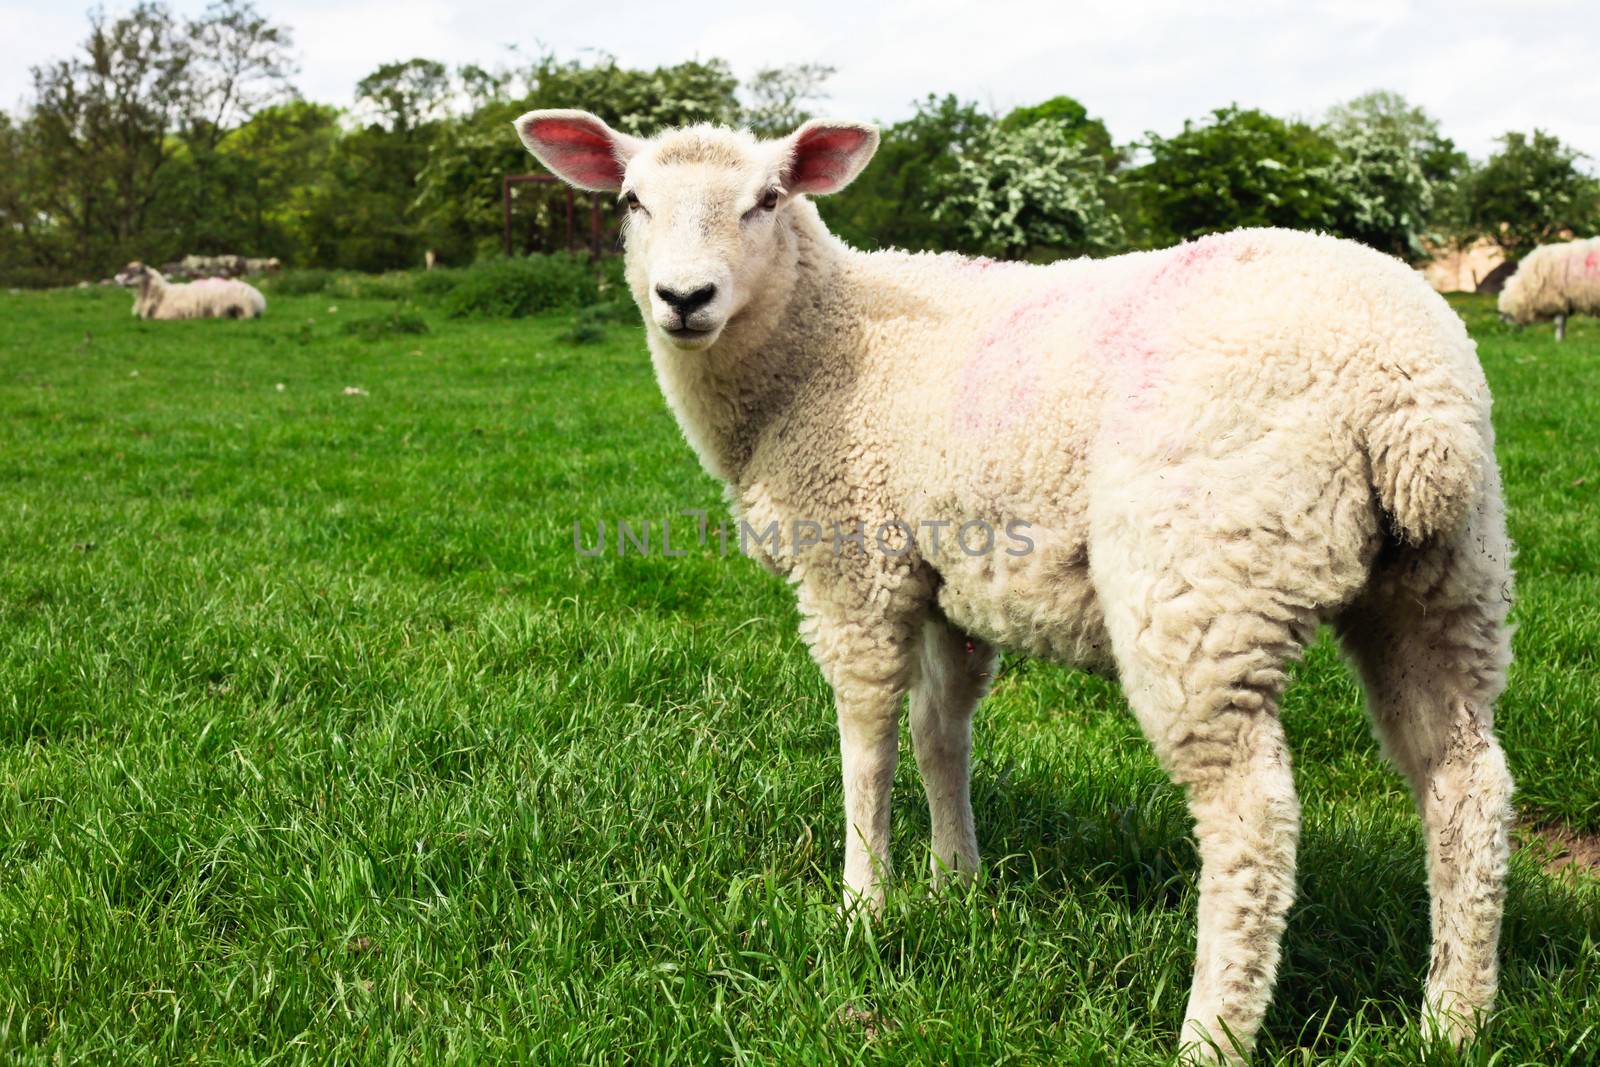 A young sheep in a lush green field in England